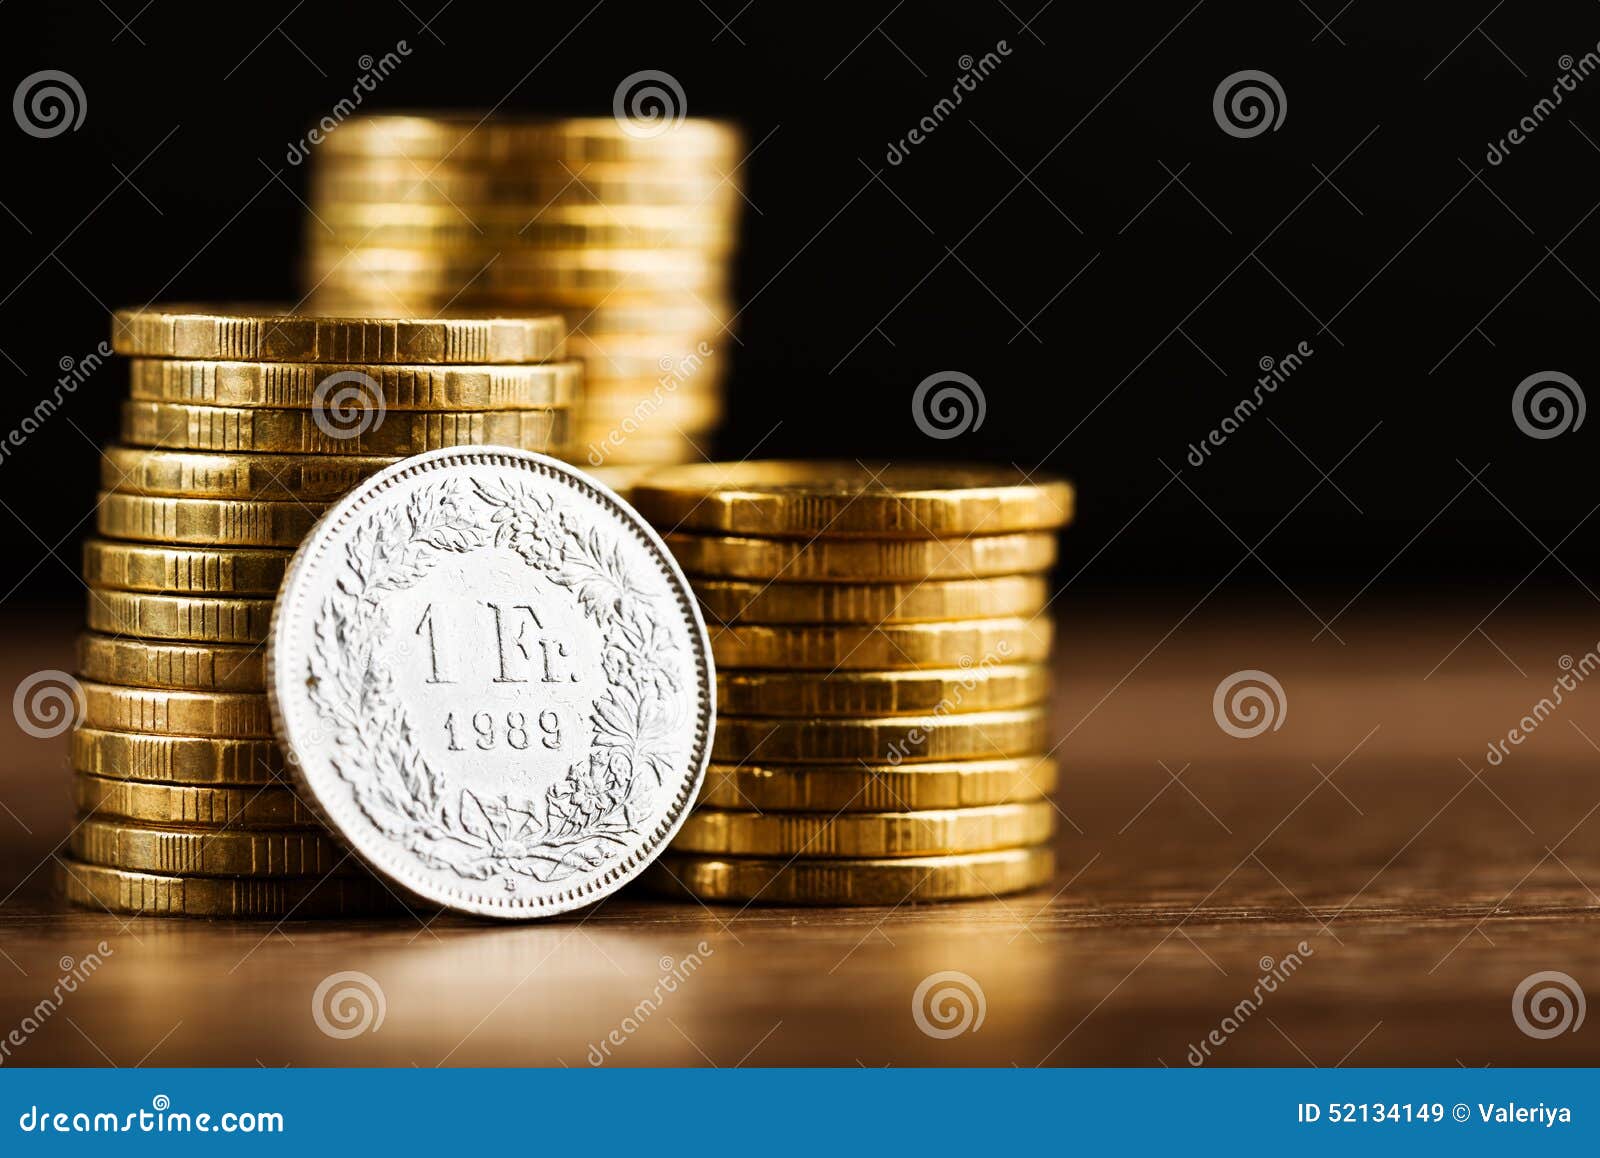 one swiss frank coin and gold money on the desk